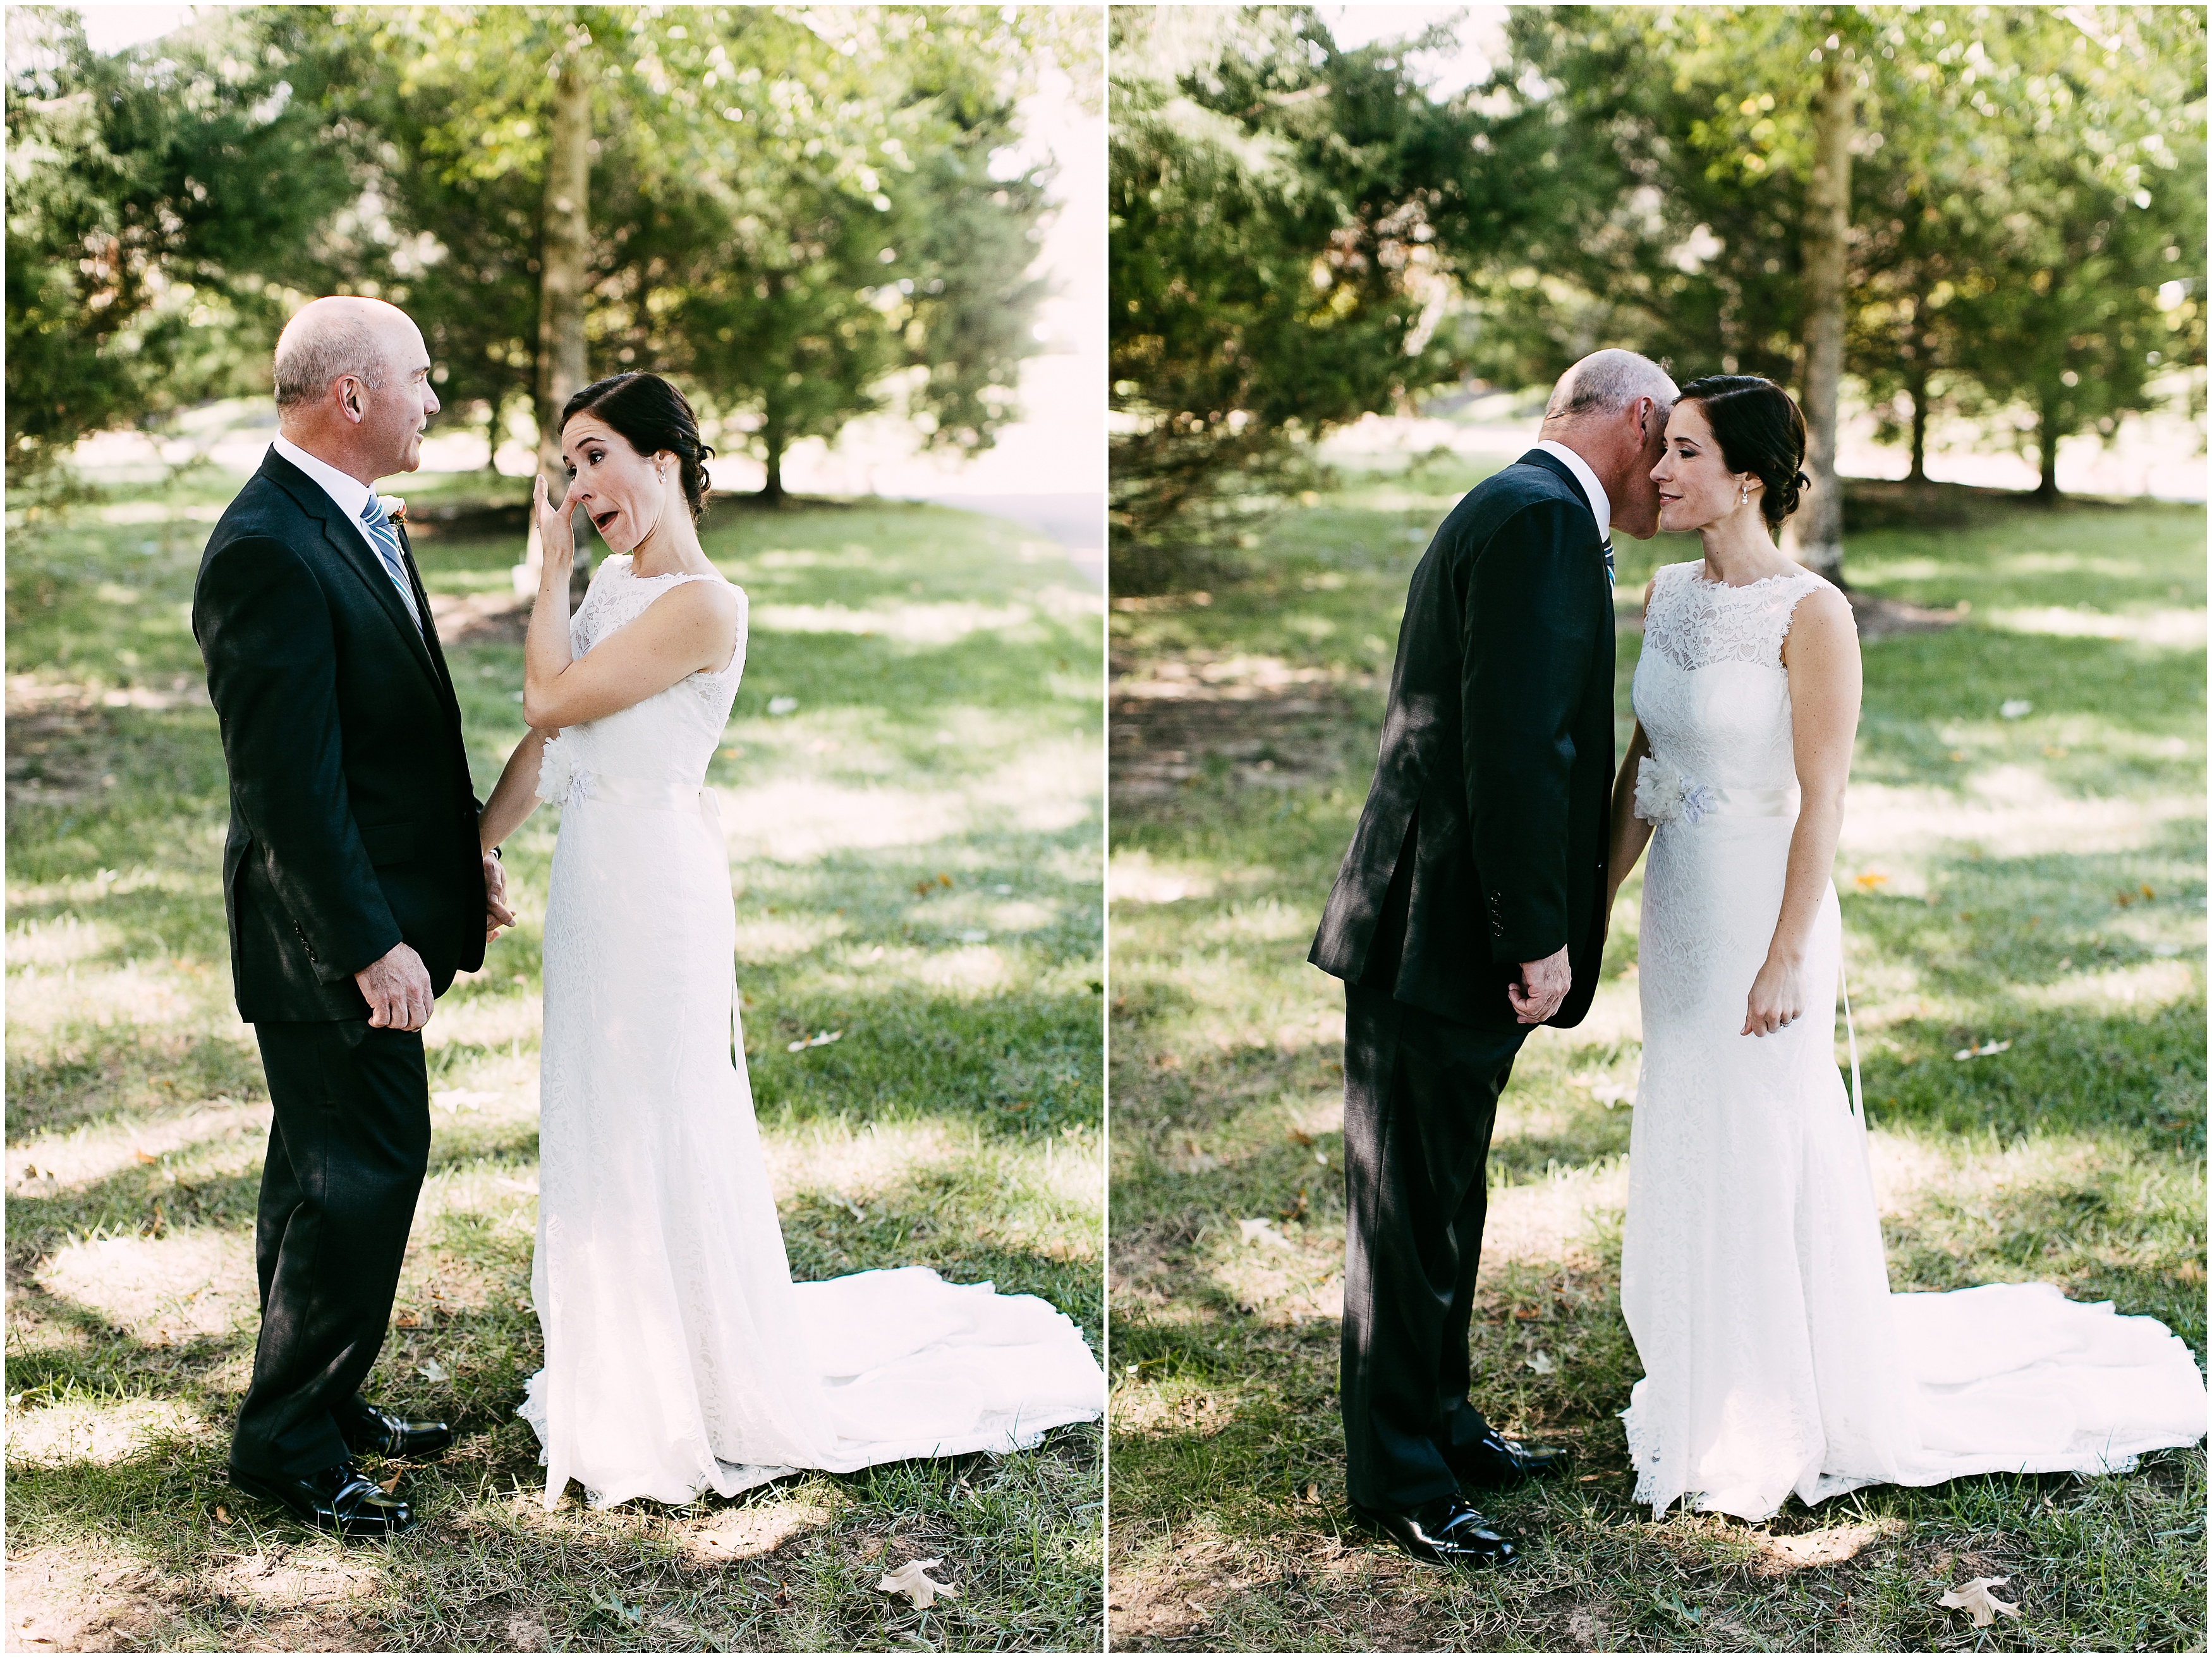 father-daughter-first-look-dad-seeing-daughter-creative-wedding-photographer-candid-wedding-photography-spring-creek-ranch